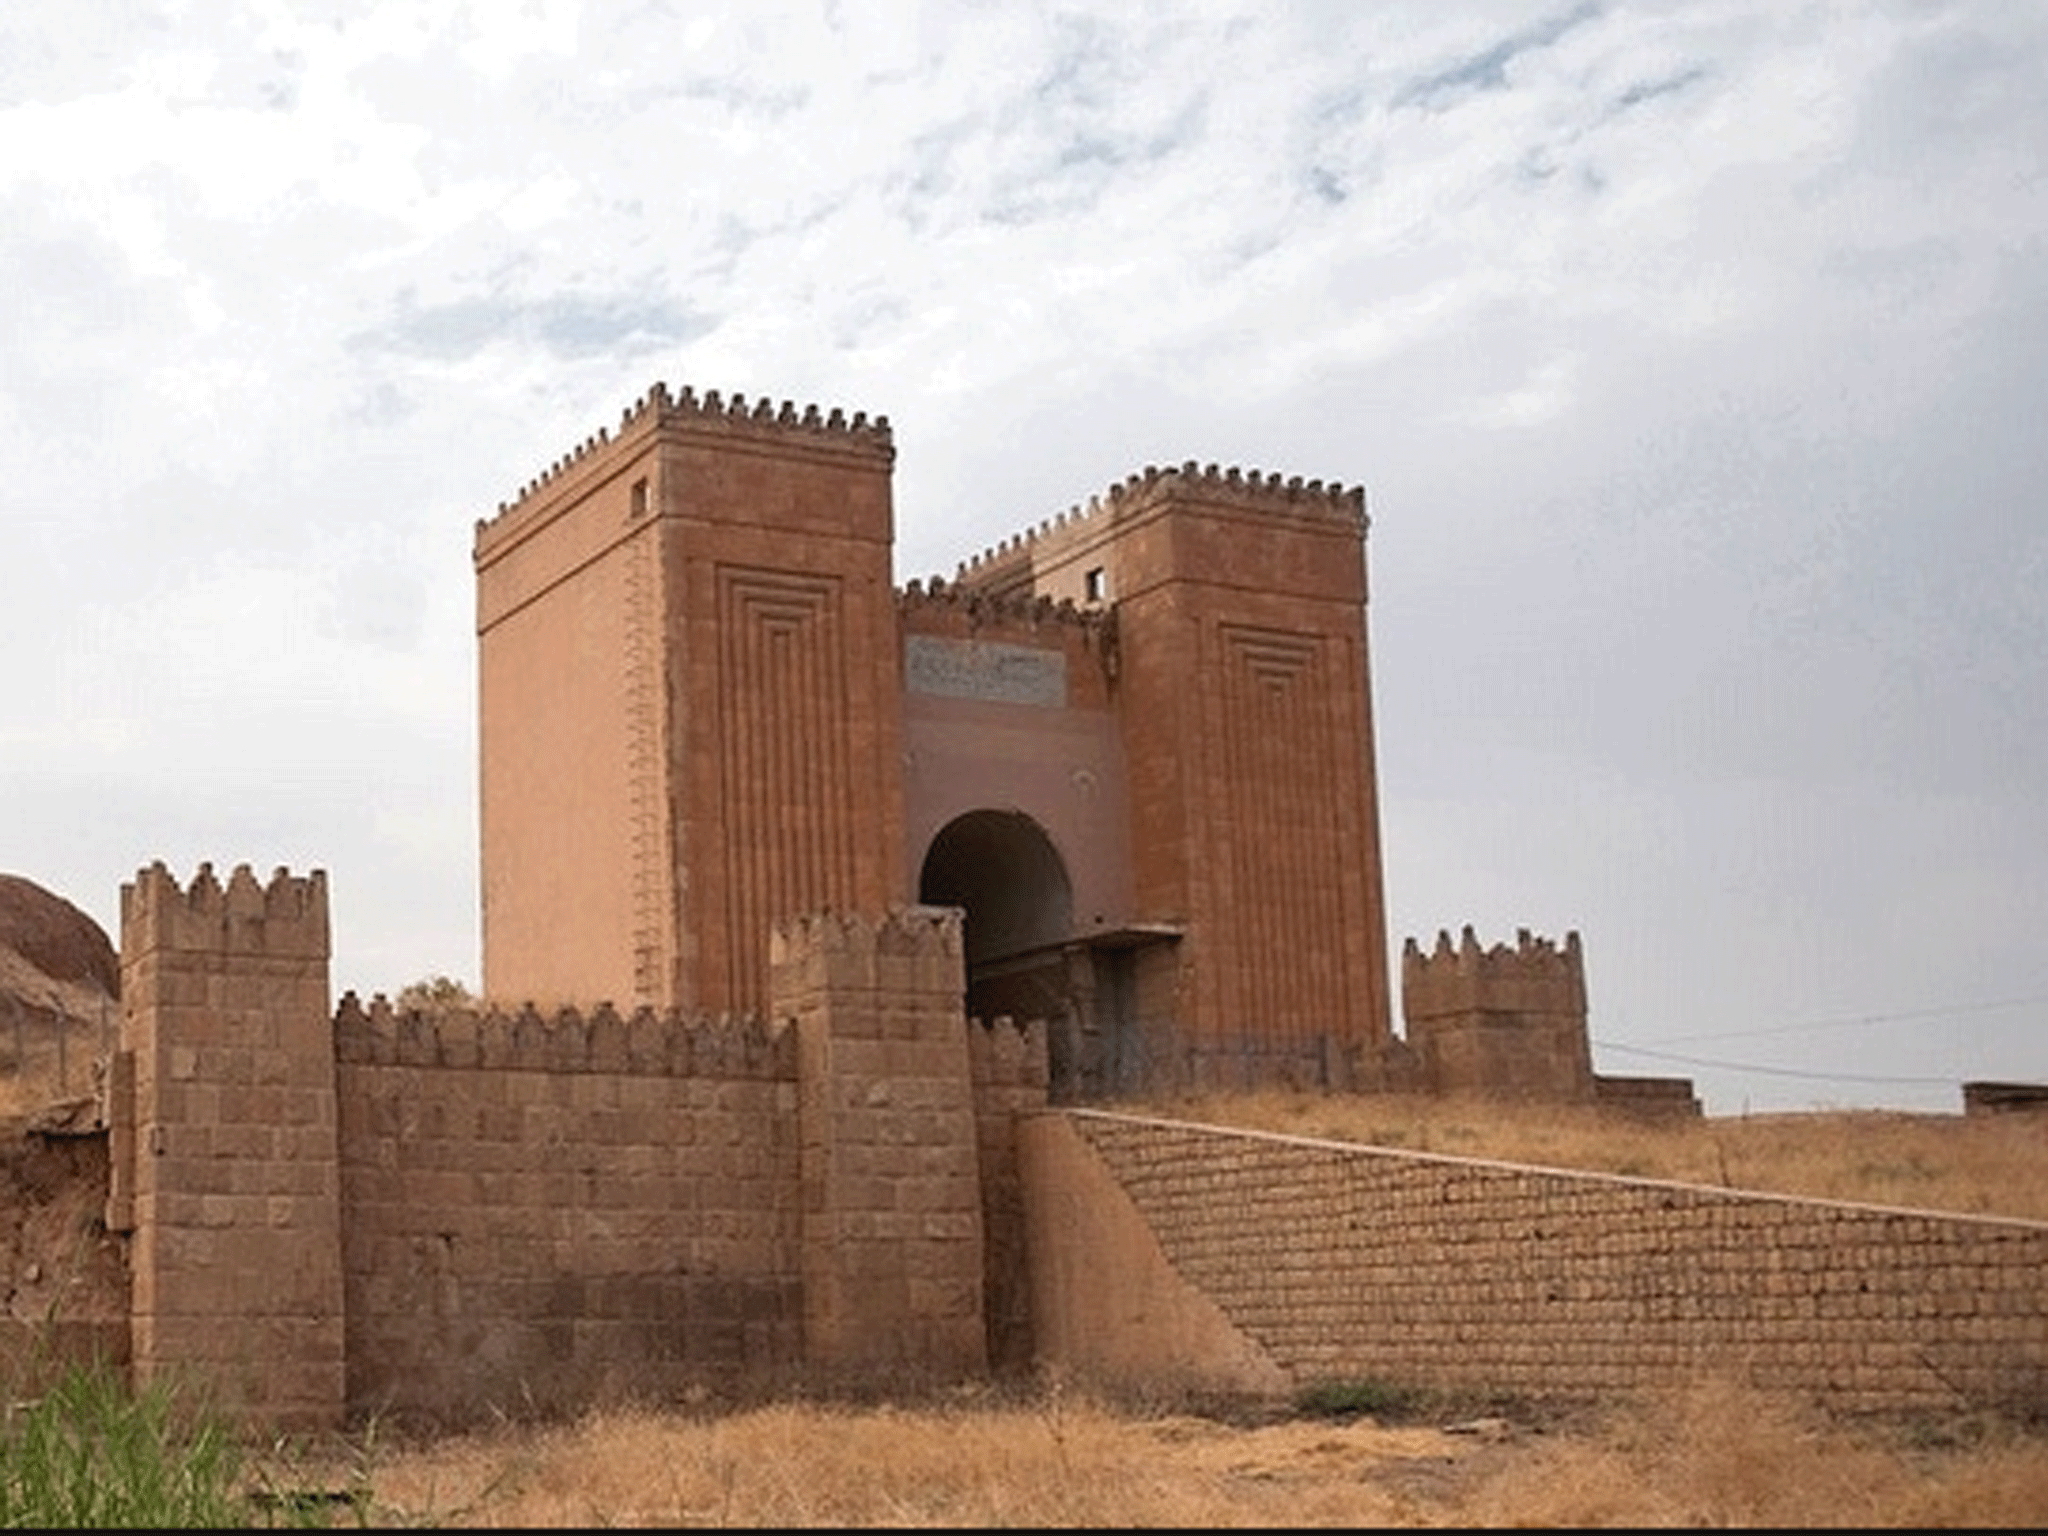 The Mishqi Gate seen guarding the ancient city of Nineveh